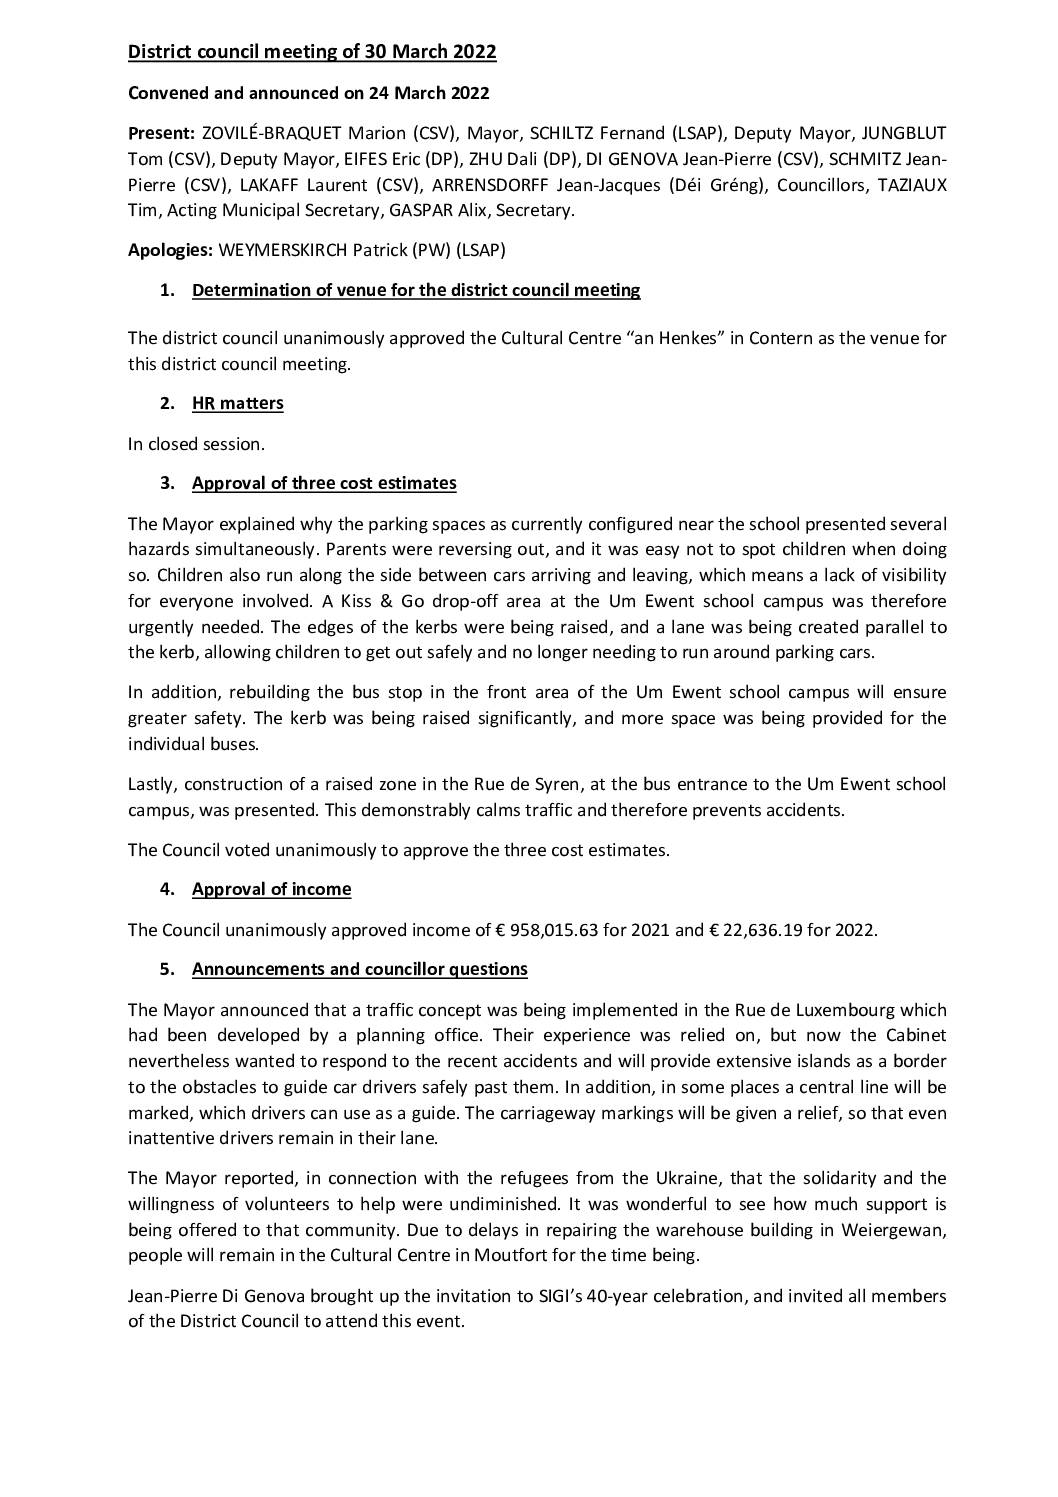 2022-03-30-Rapport-of-the-District-council-meeting